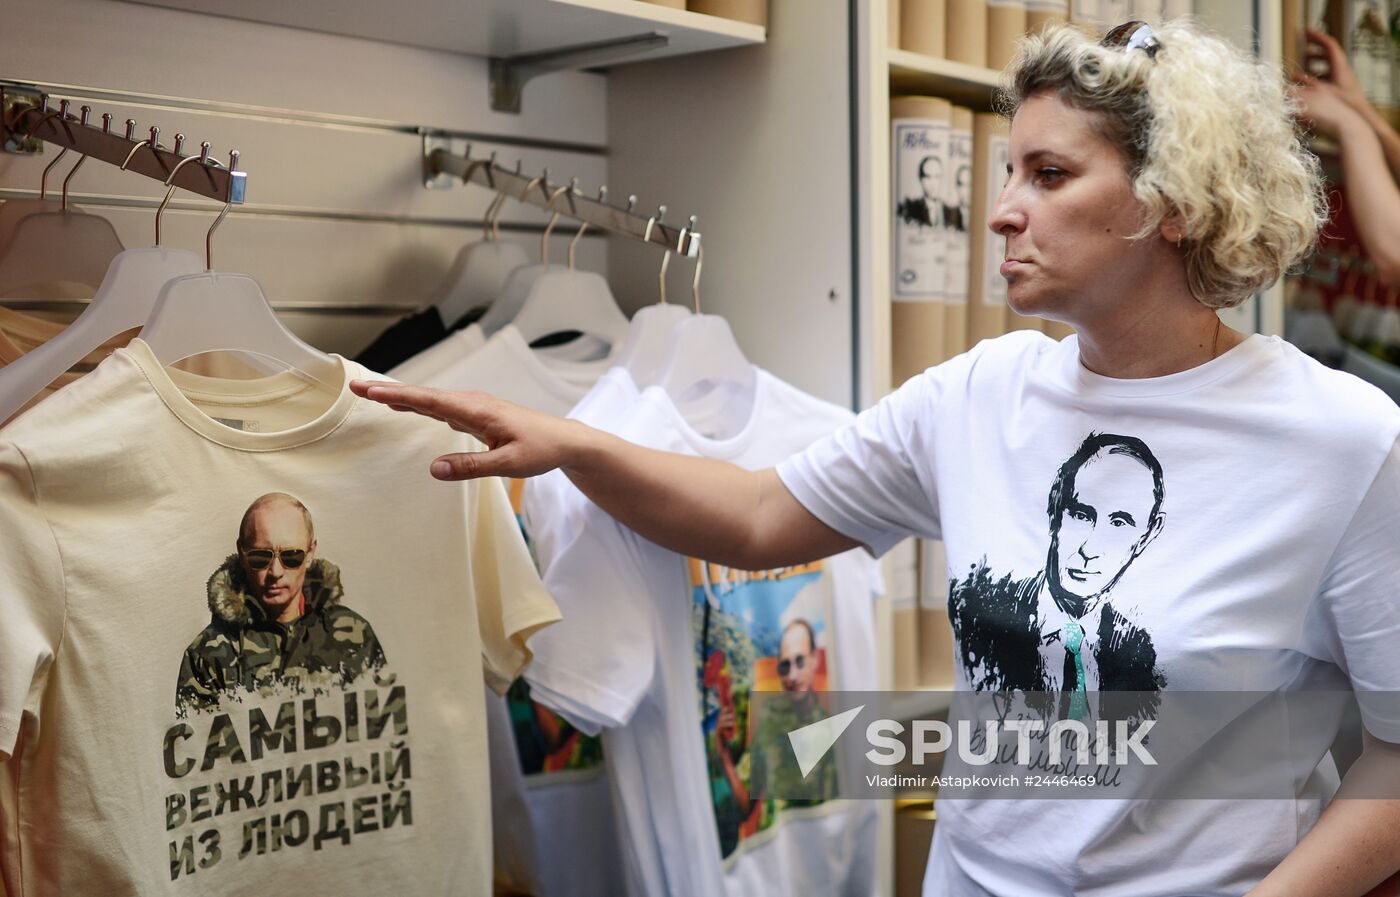 Vse Putem t-shirts depicting Vladimir Putin available for sale in Moscow